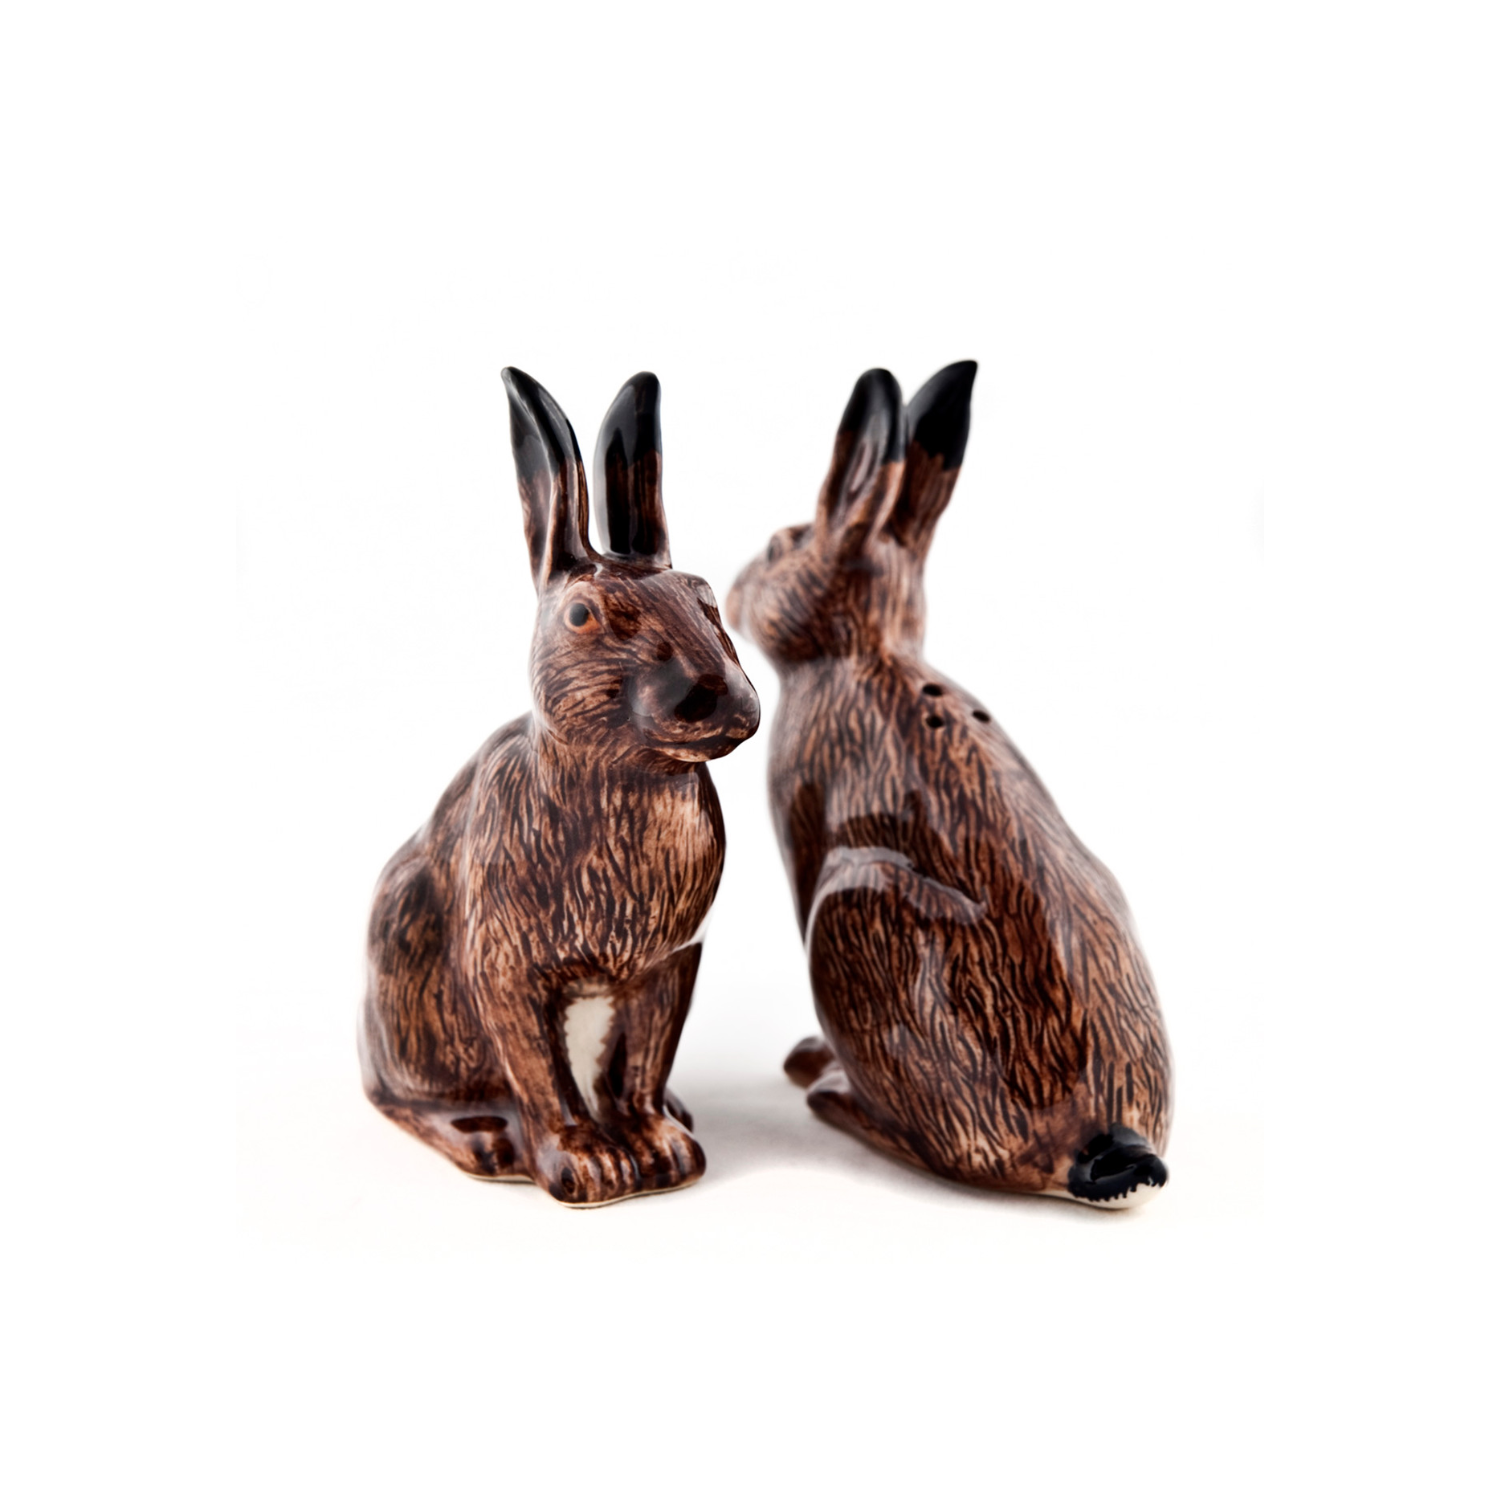 Hare salt and pepper shakers